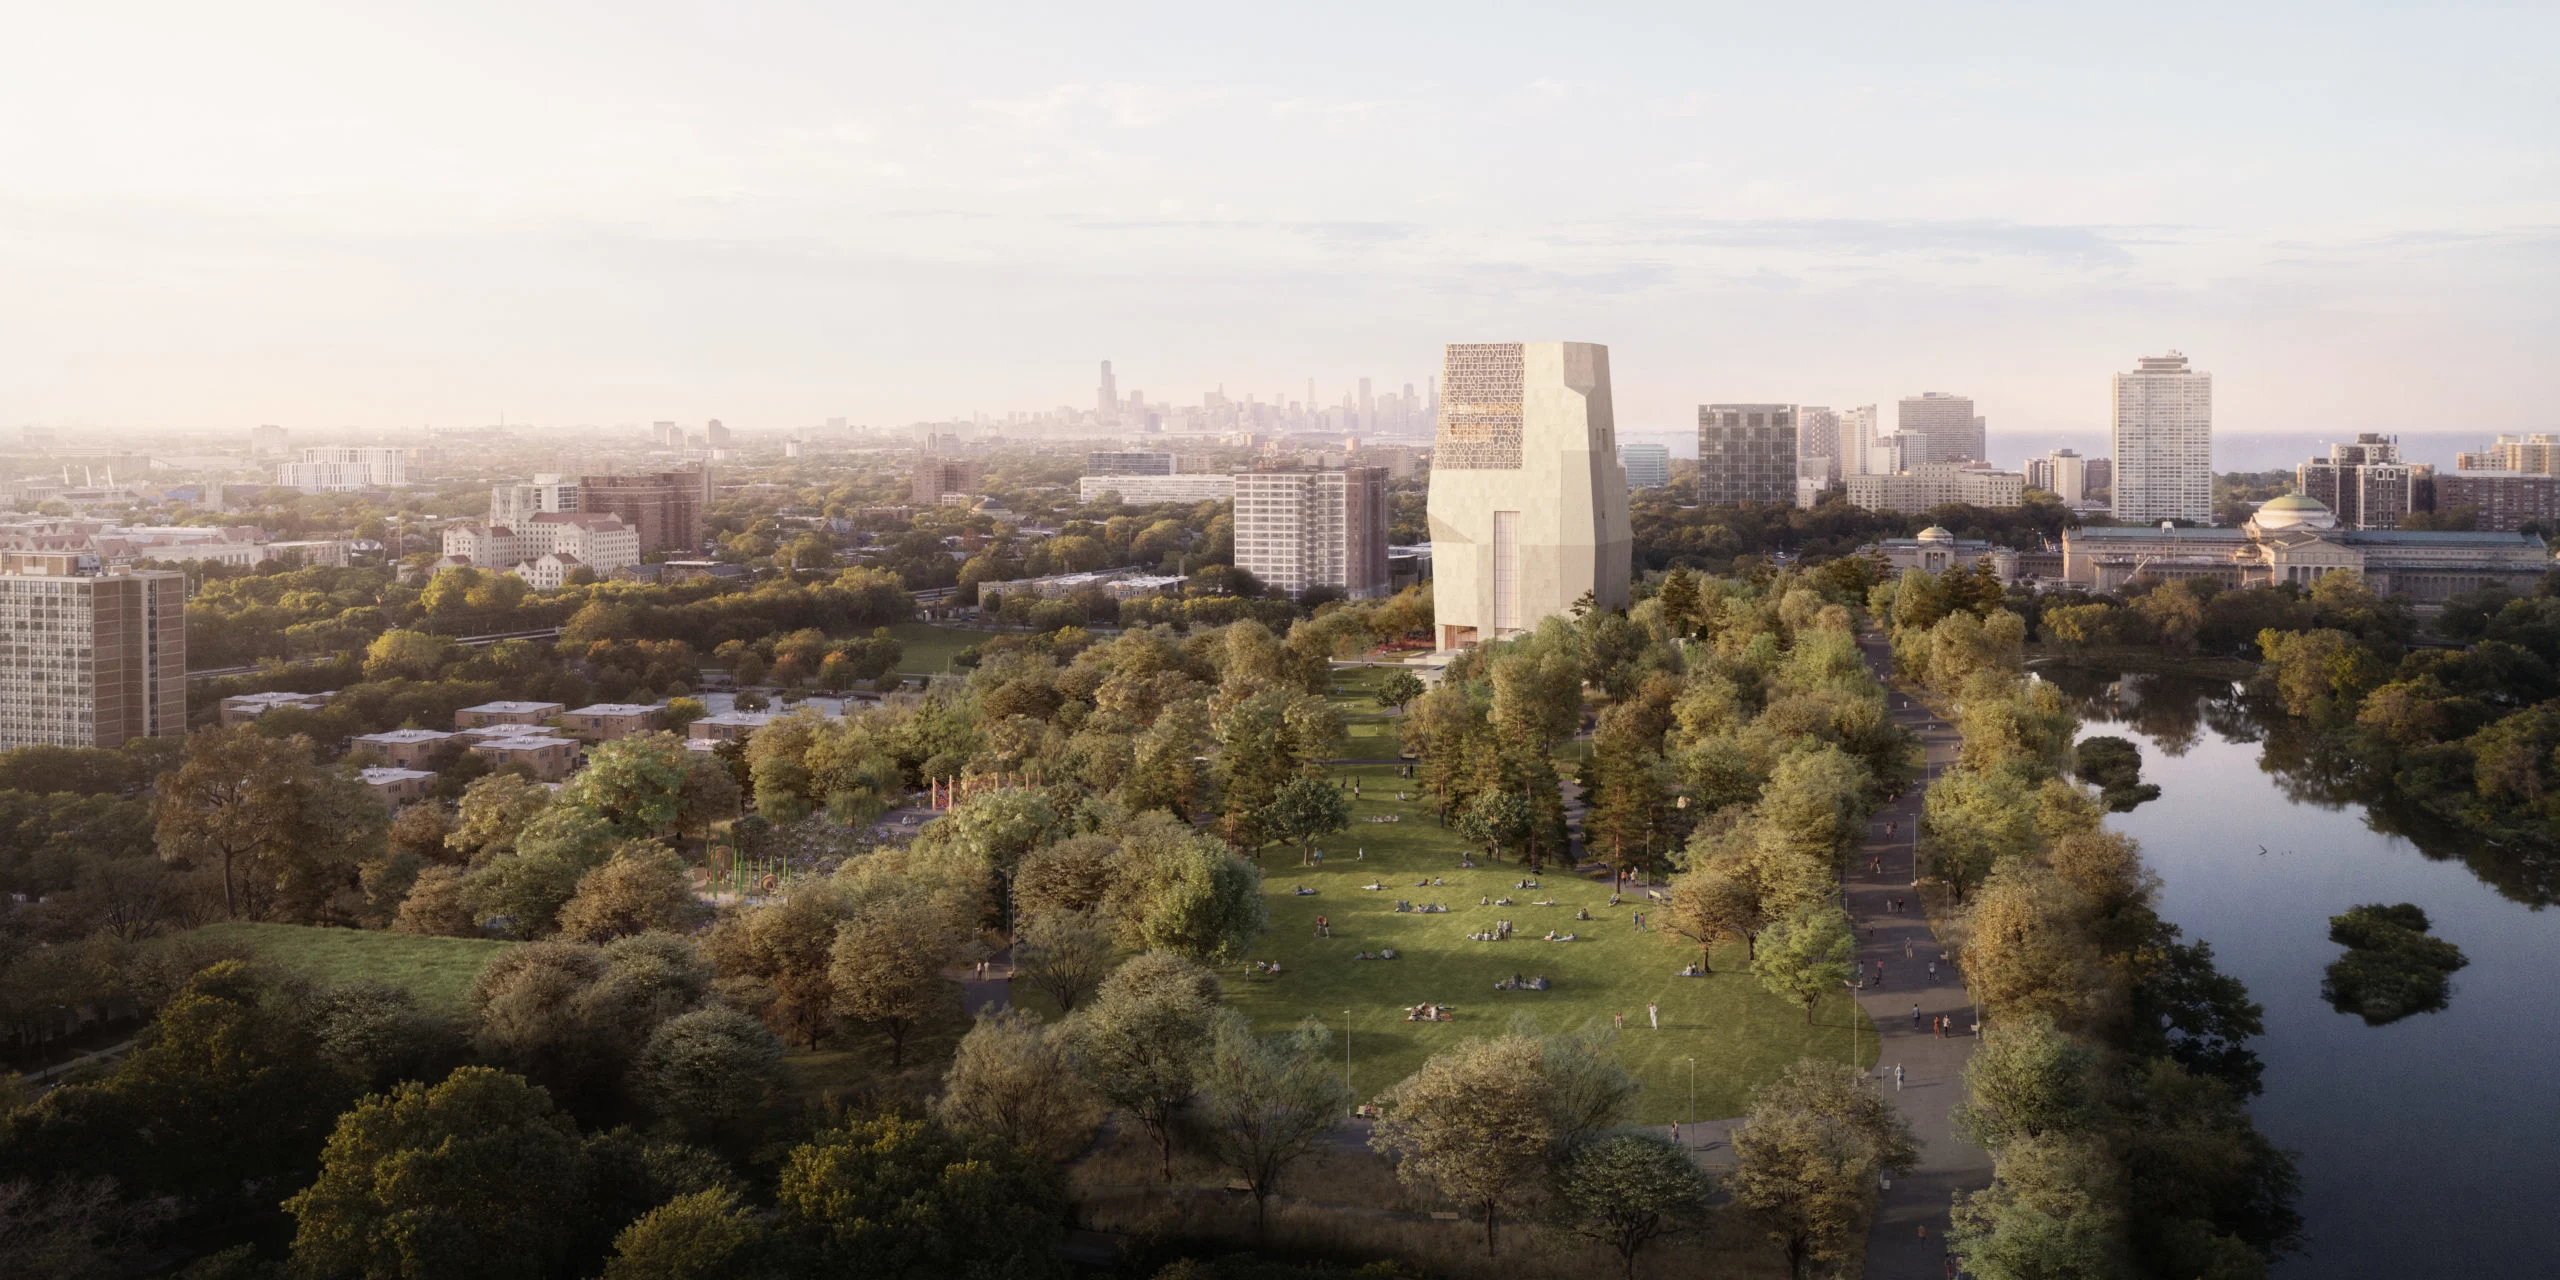 A rendering of the Obama Presidential Center campus.